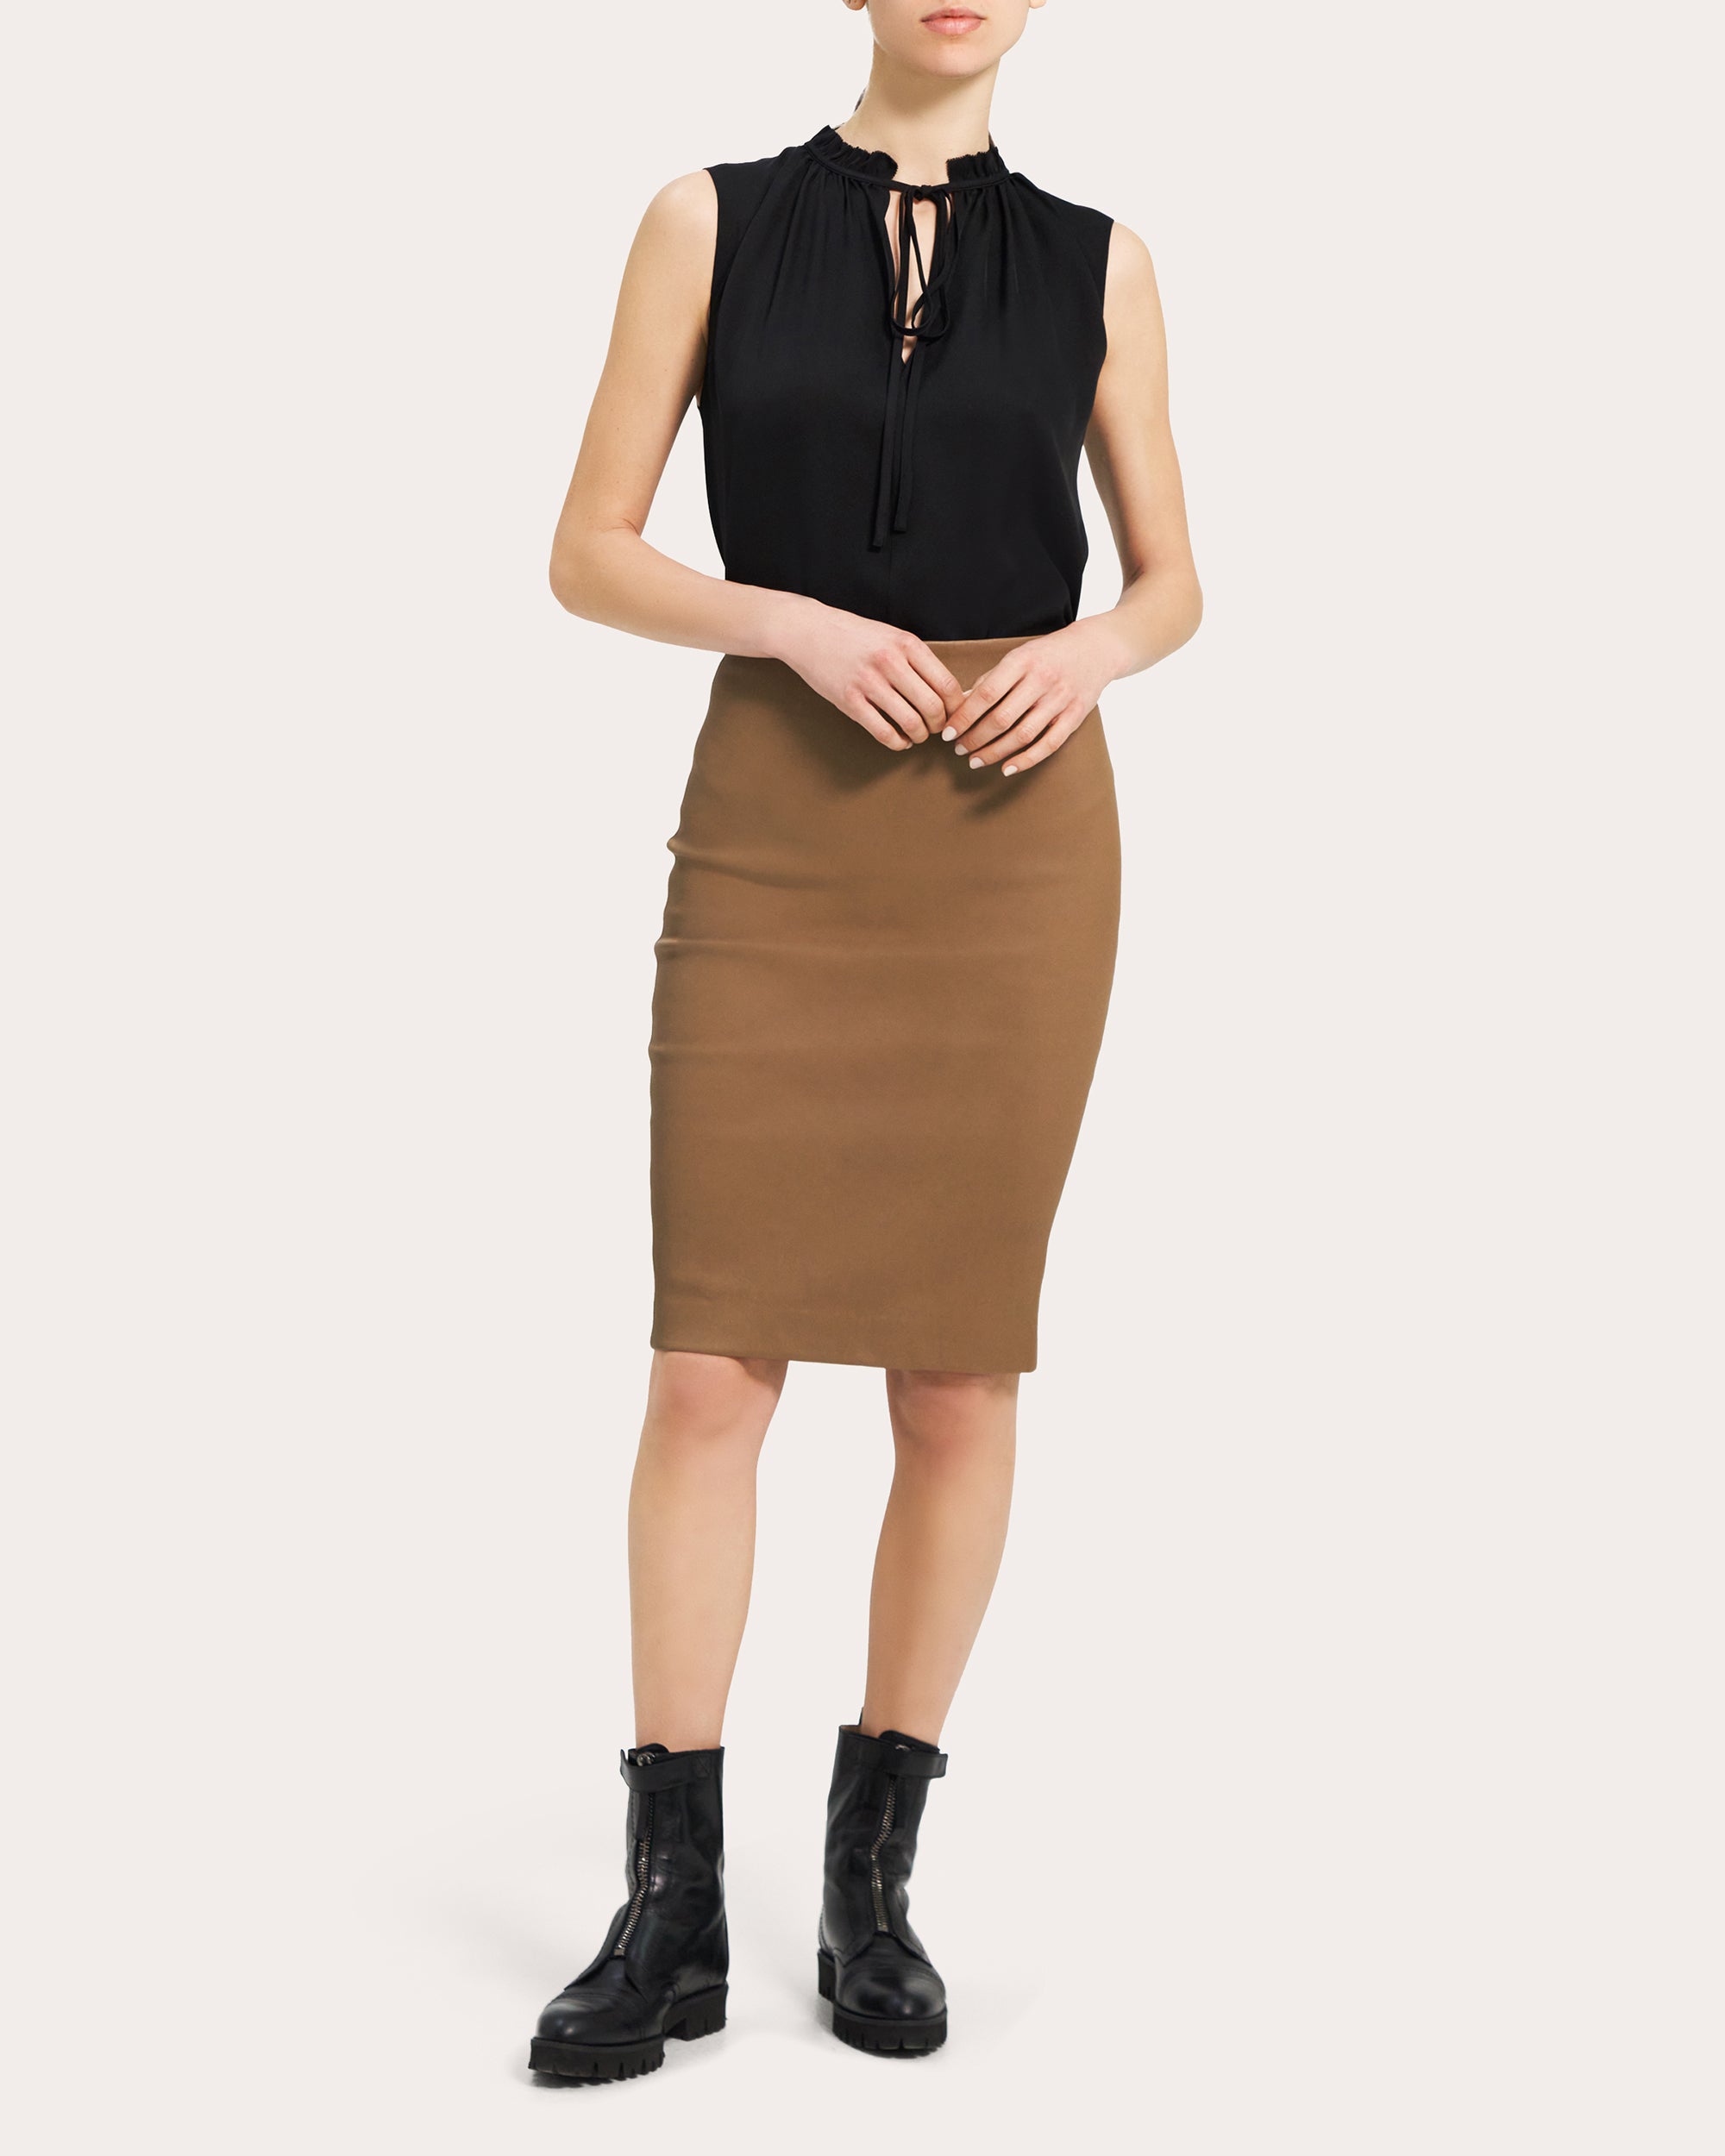 THEORY WOMEN'S LEATHER SKINNY PENCIL SKIRT